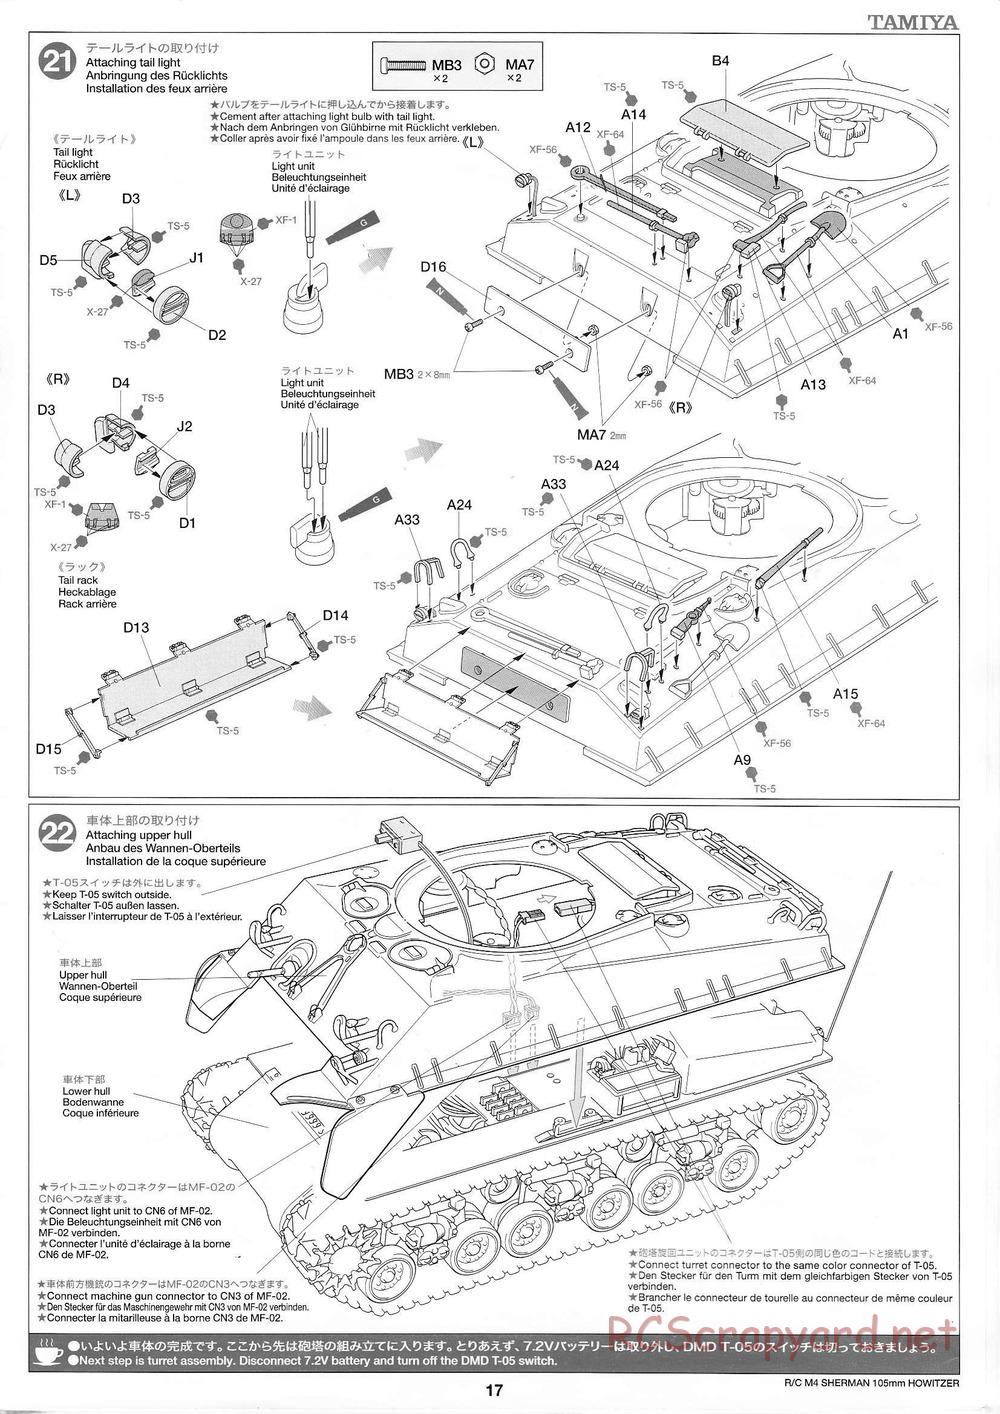 Tamiya - M4 Sherman 105mm Howitzer - 1/16 Scale Chassis - Manual - Page 17